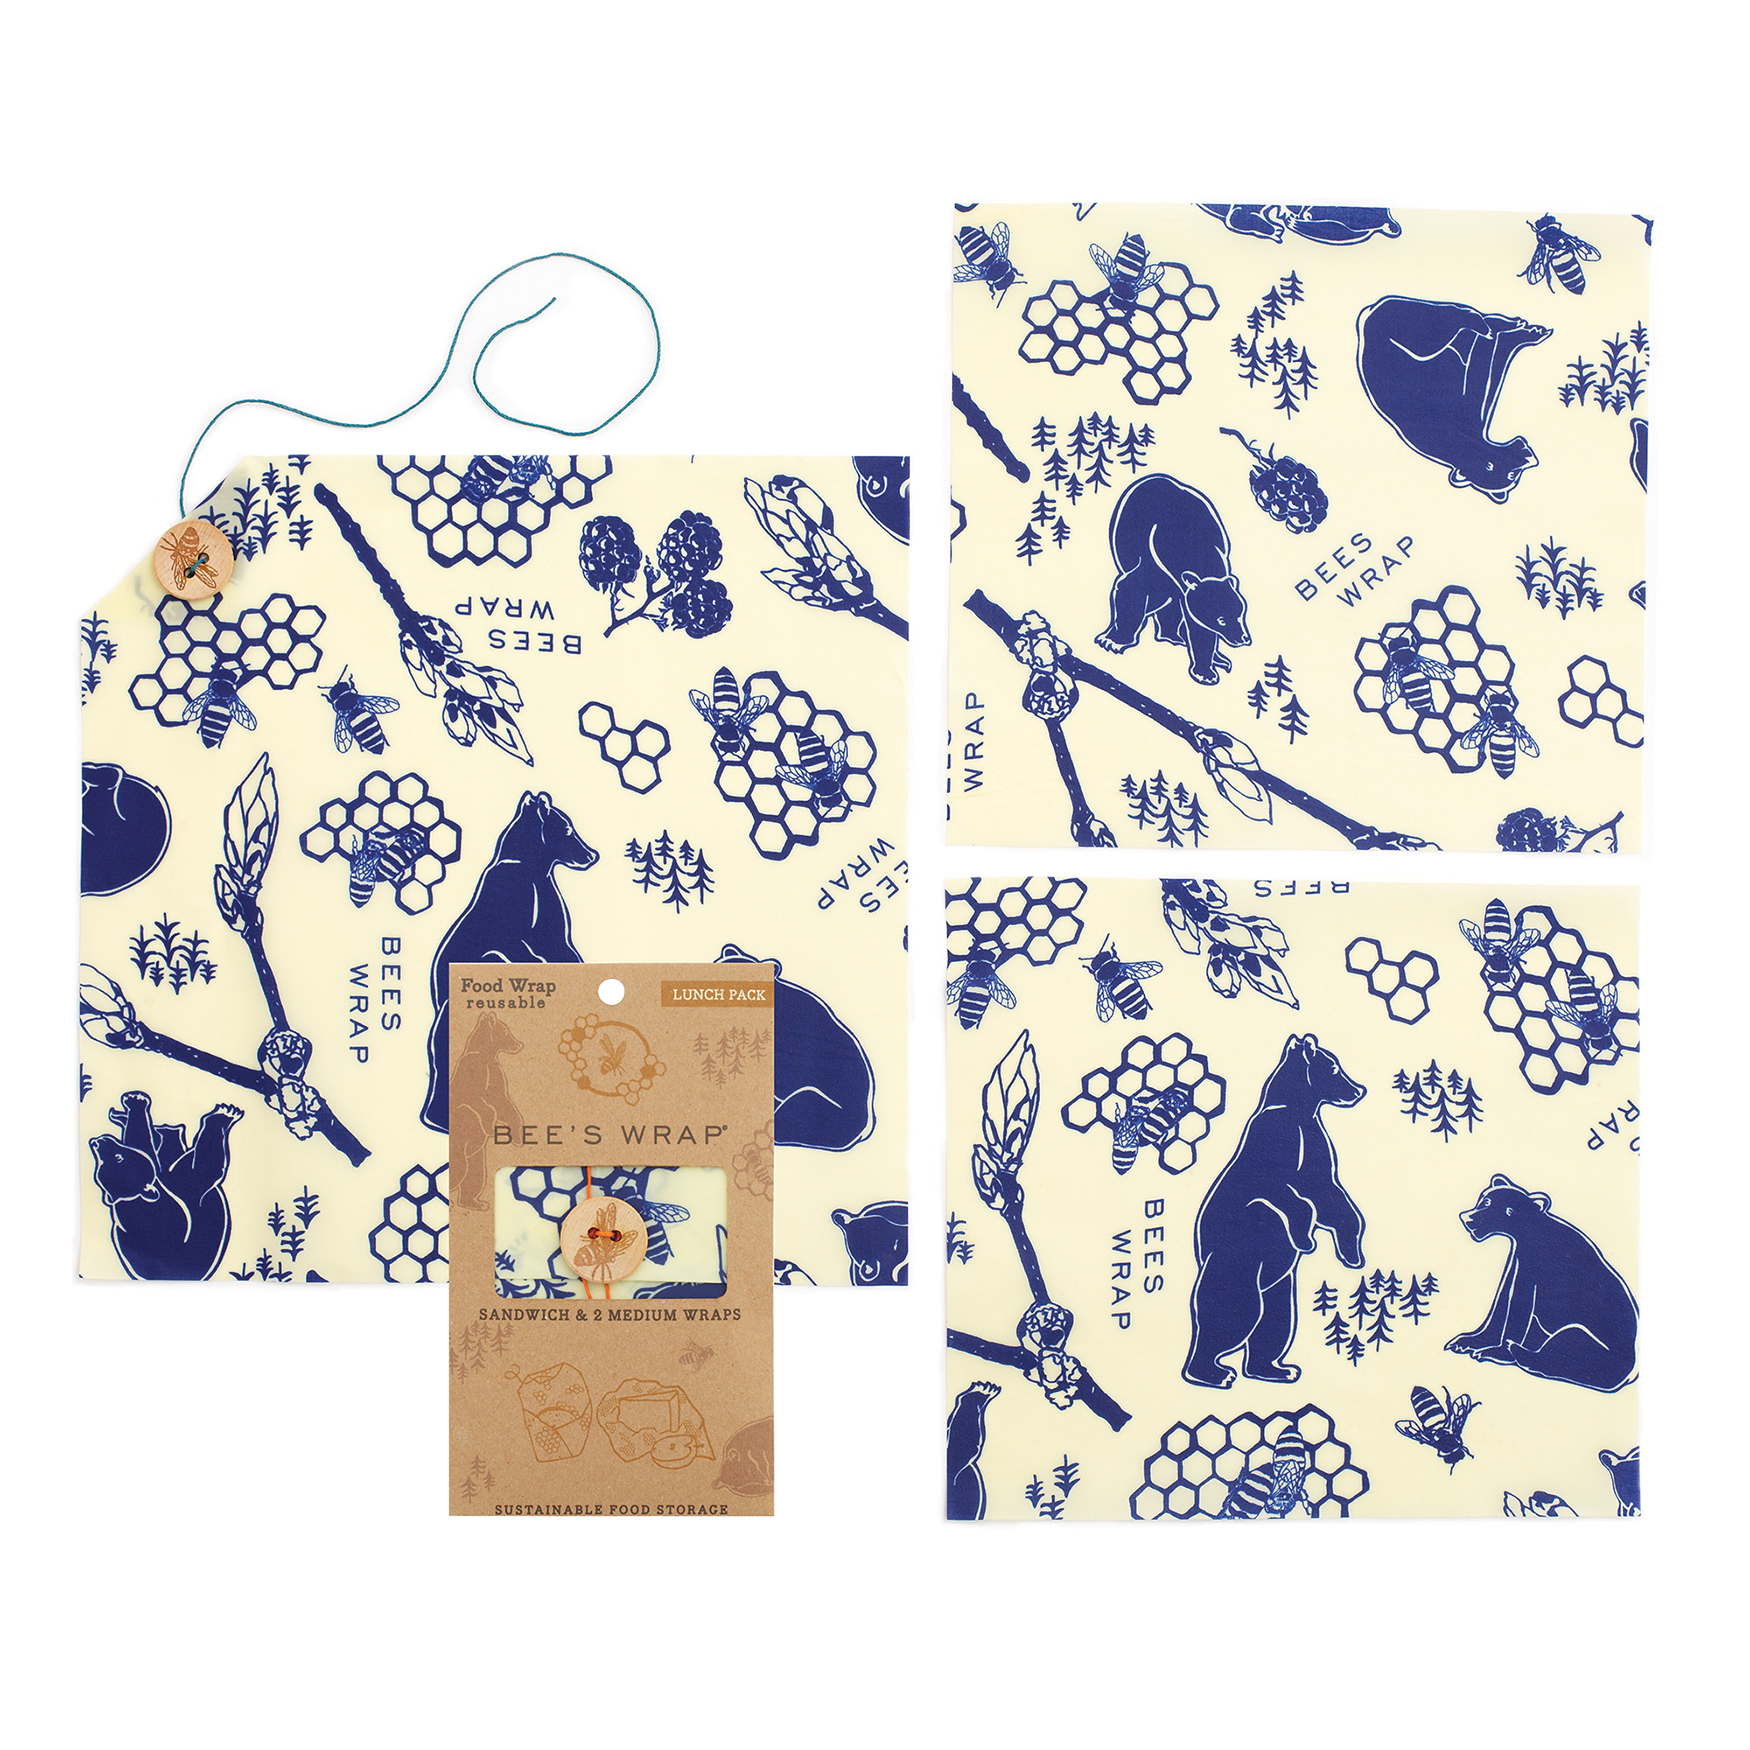 Bee's Wrap - Lunch Pack - with Certified Organic Cotton - Plastic and Silicone Free - Reusable Eco-Friendly Beeswax Food Wrap - Sandwich Wrap and 2 Medium Wraps - image 2 of 3